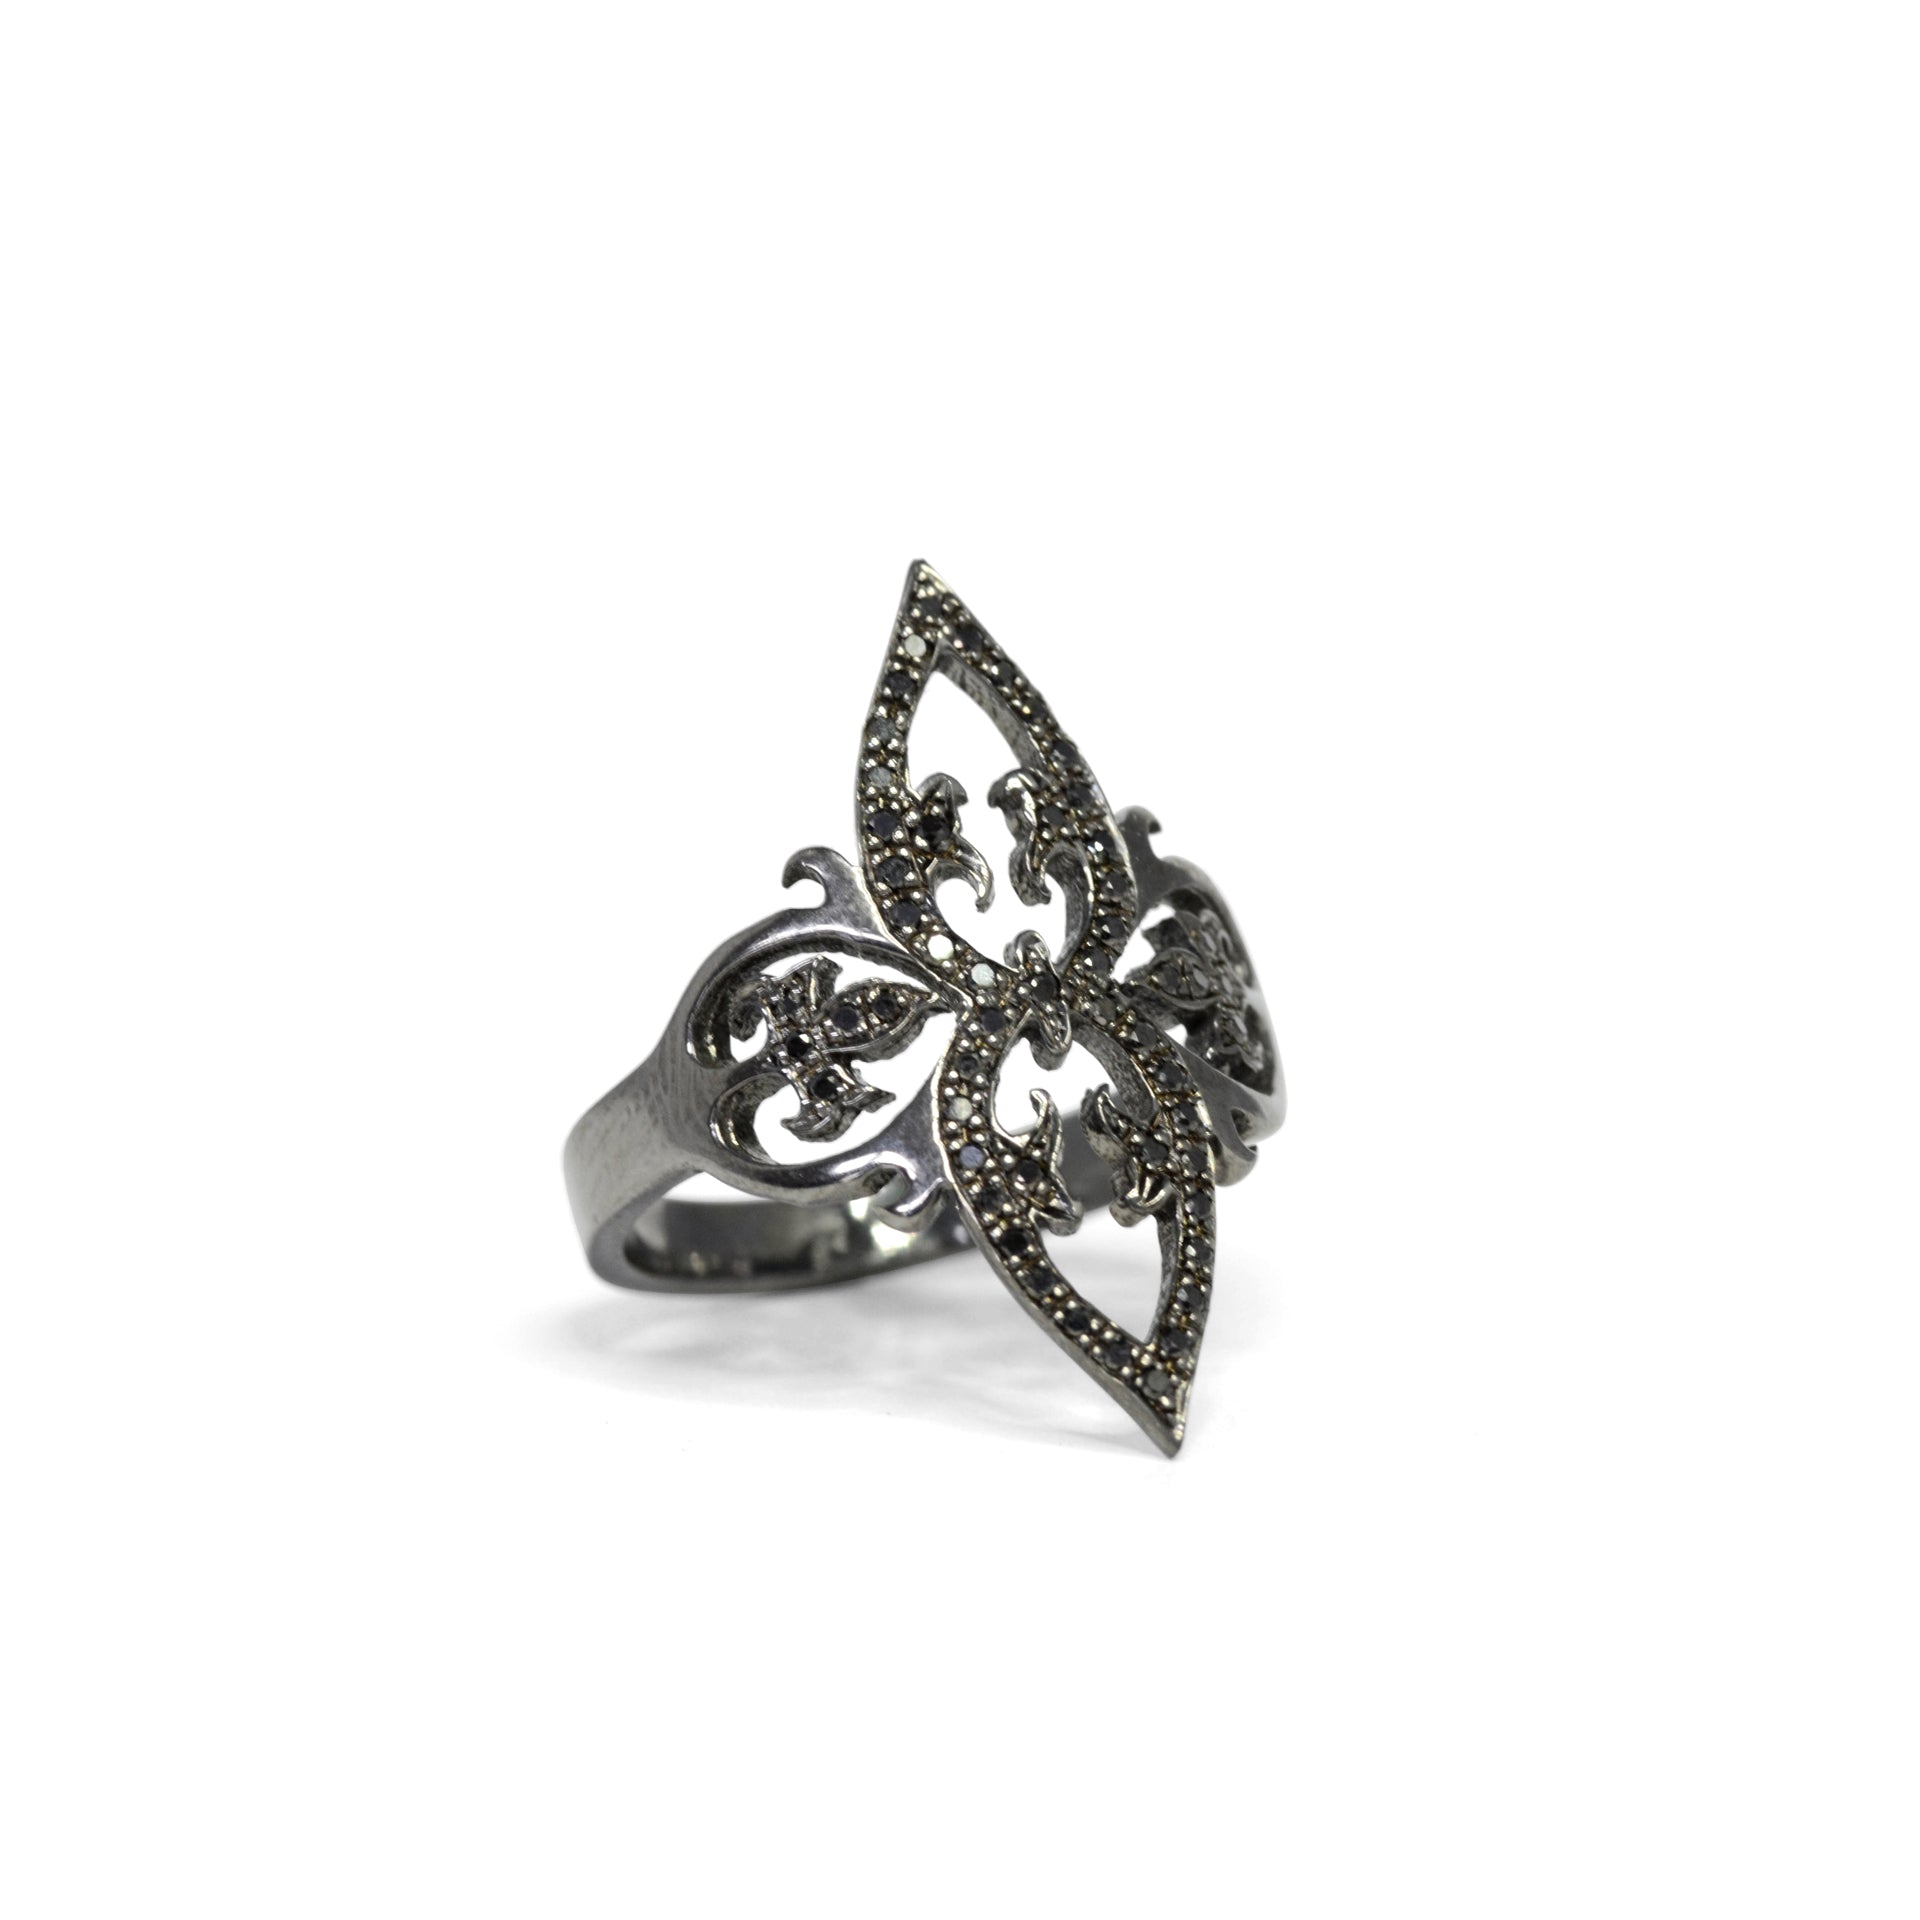 14k white gold plated in black rhodium with black pave diamonds / 6 arabesque cocktail ring